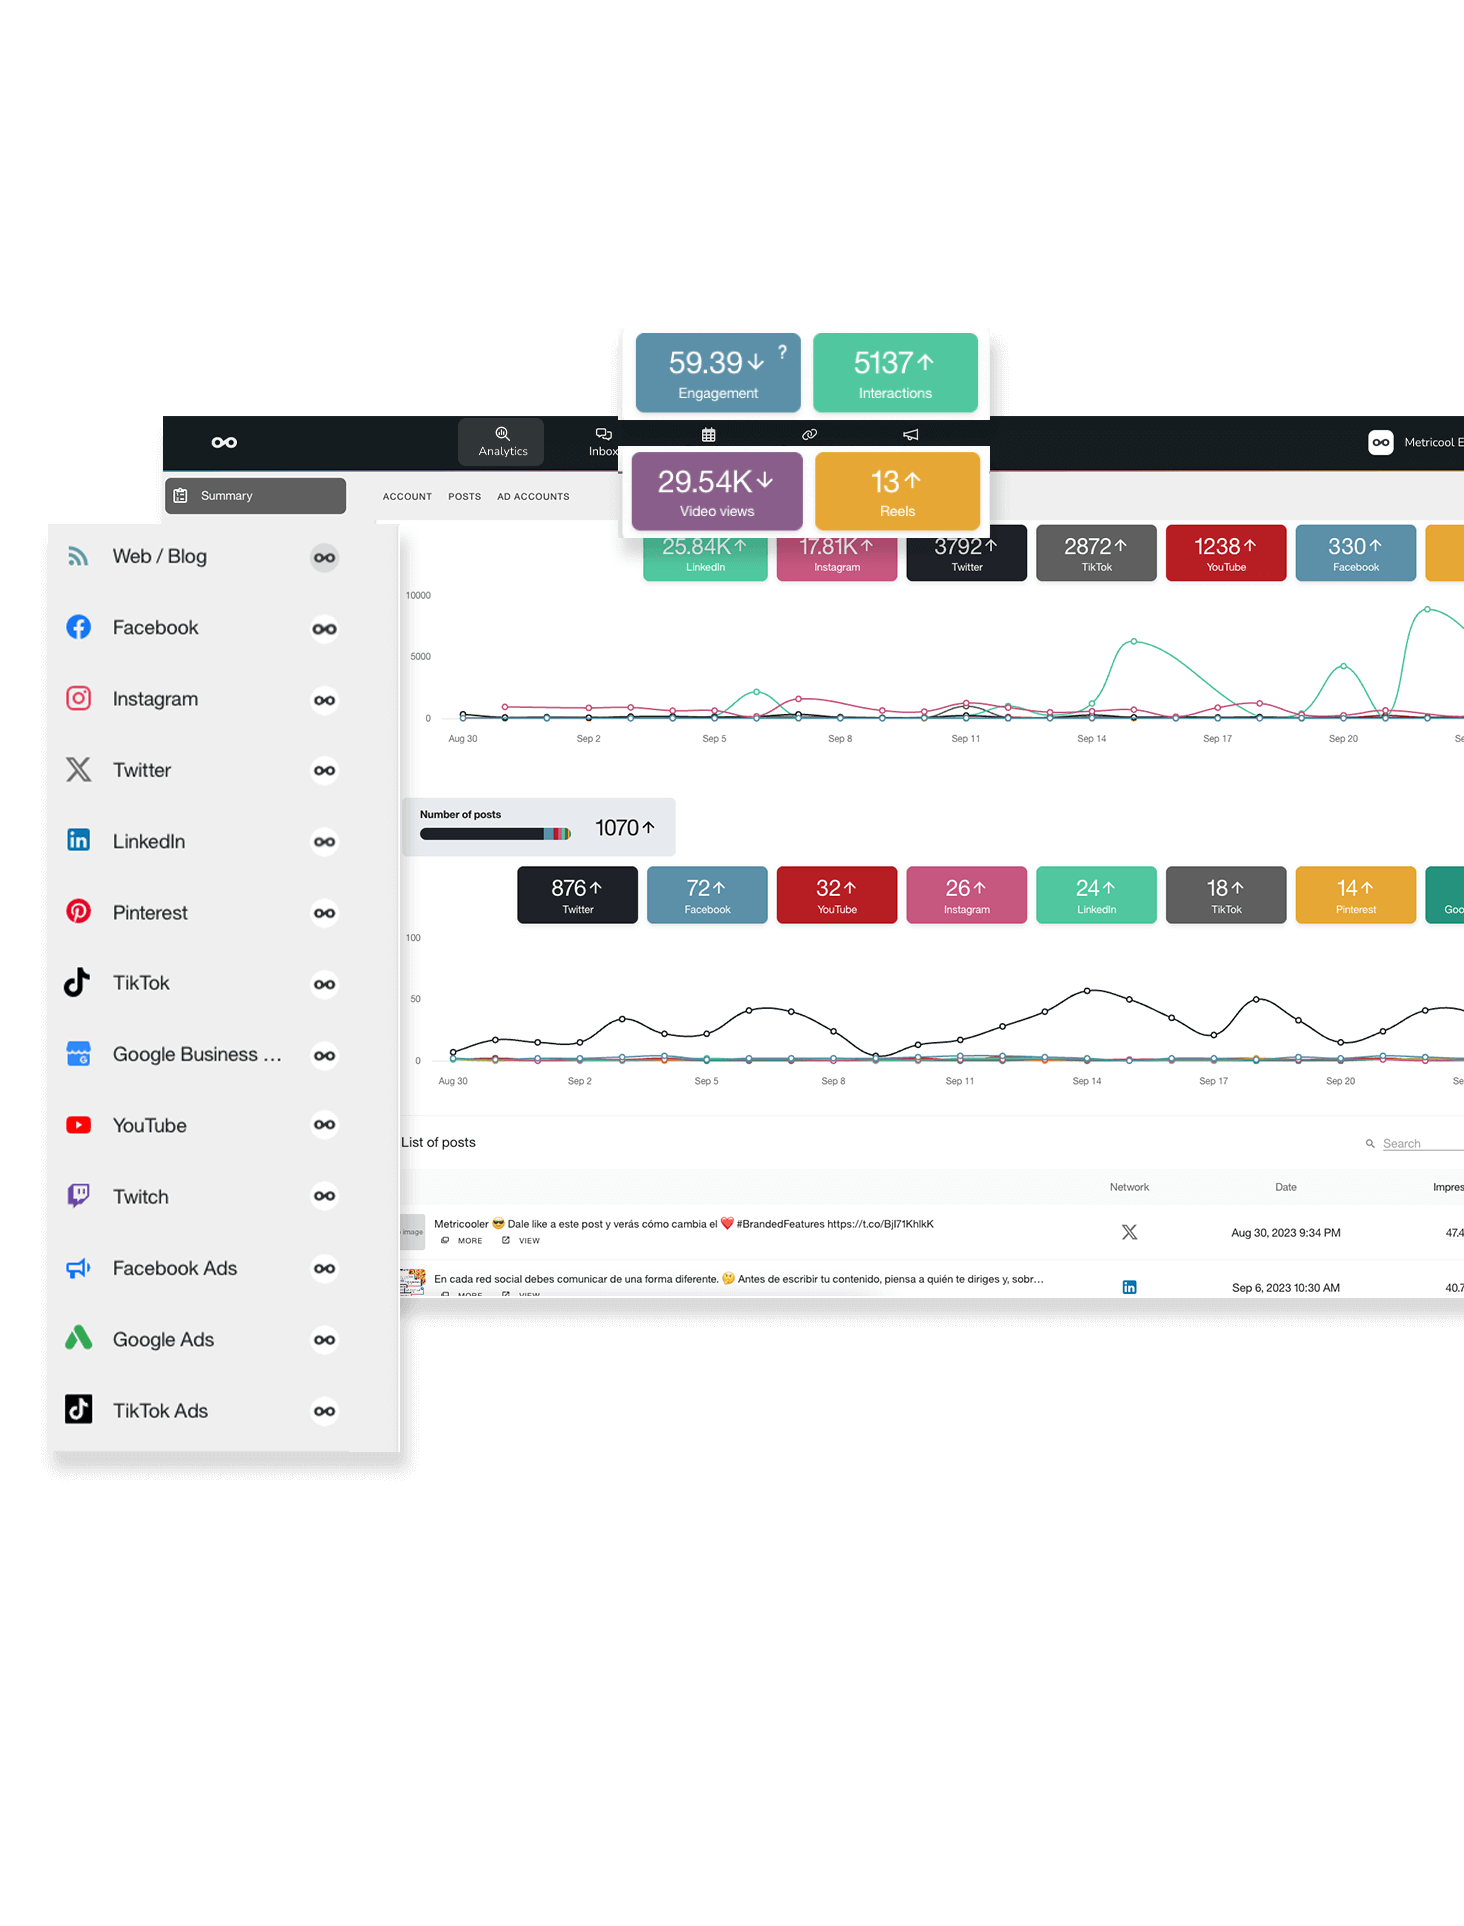 Studio: The Tools to Manage Your Channel Like a Pro